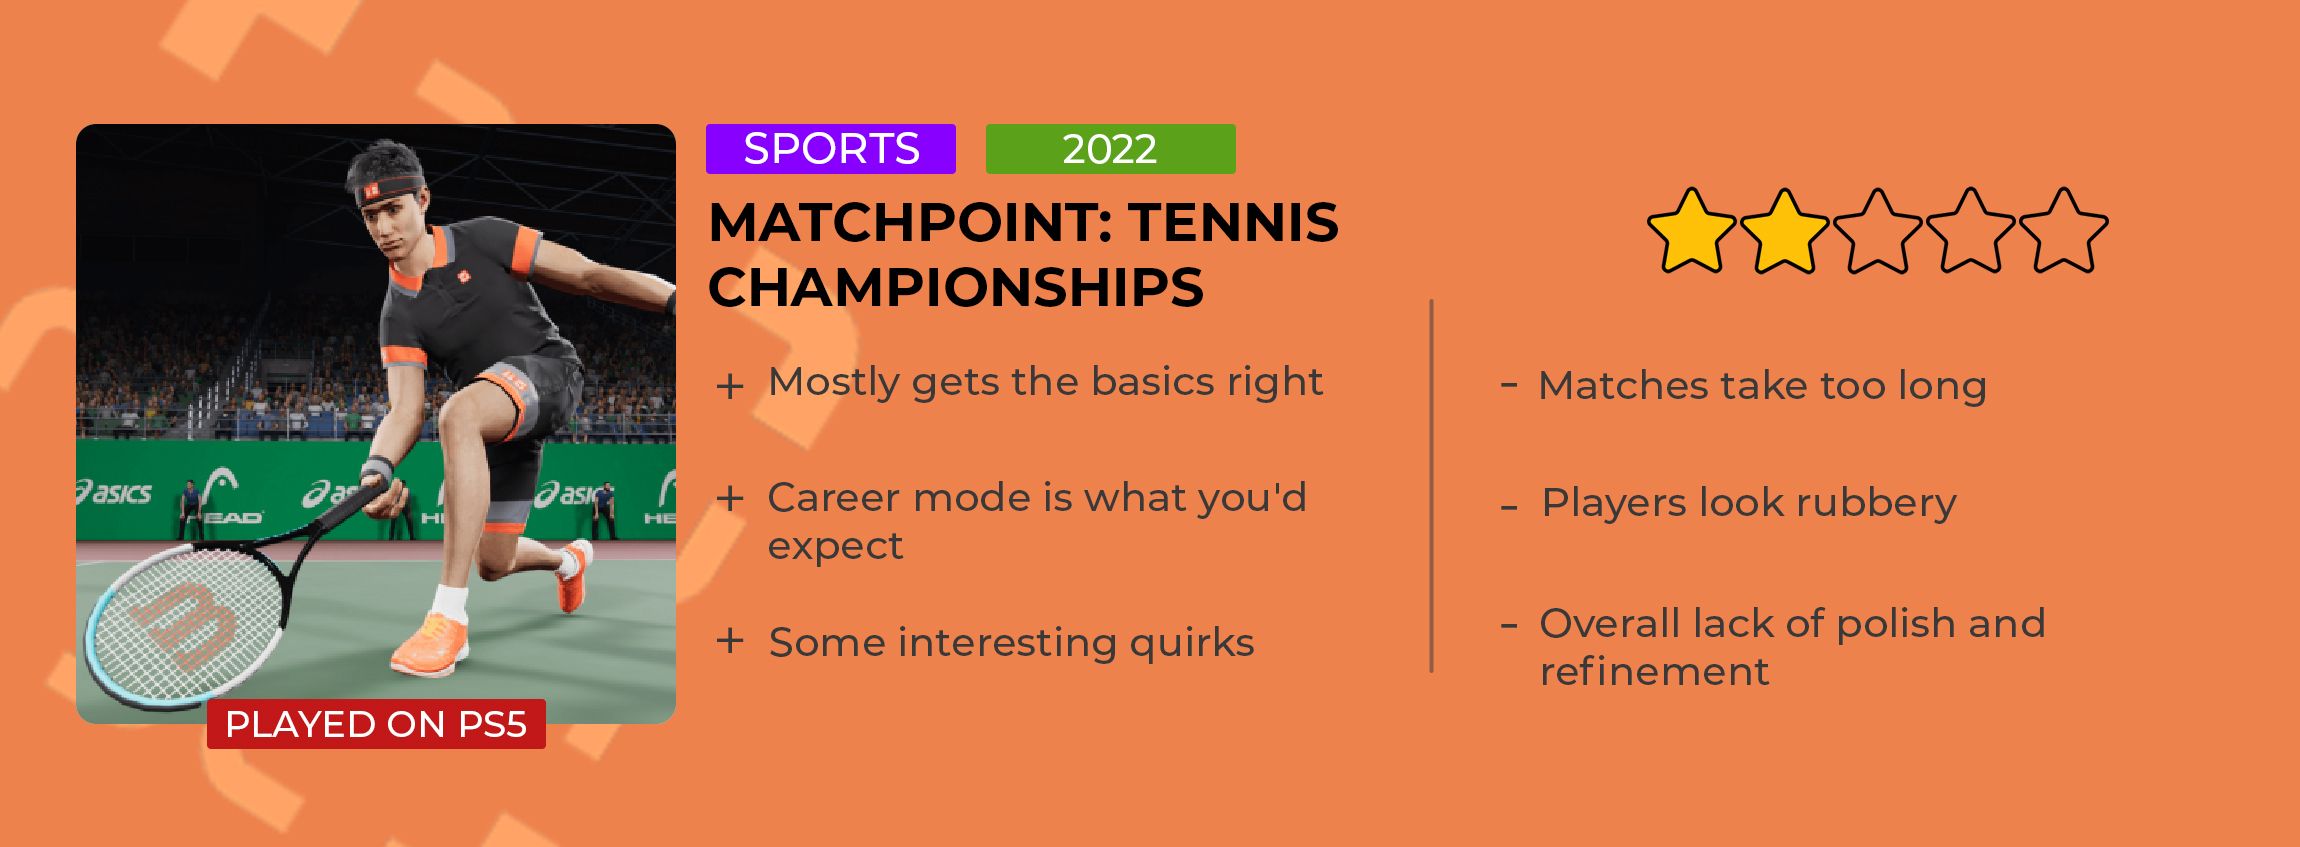 Matchpoint Review Card